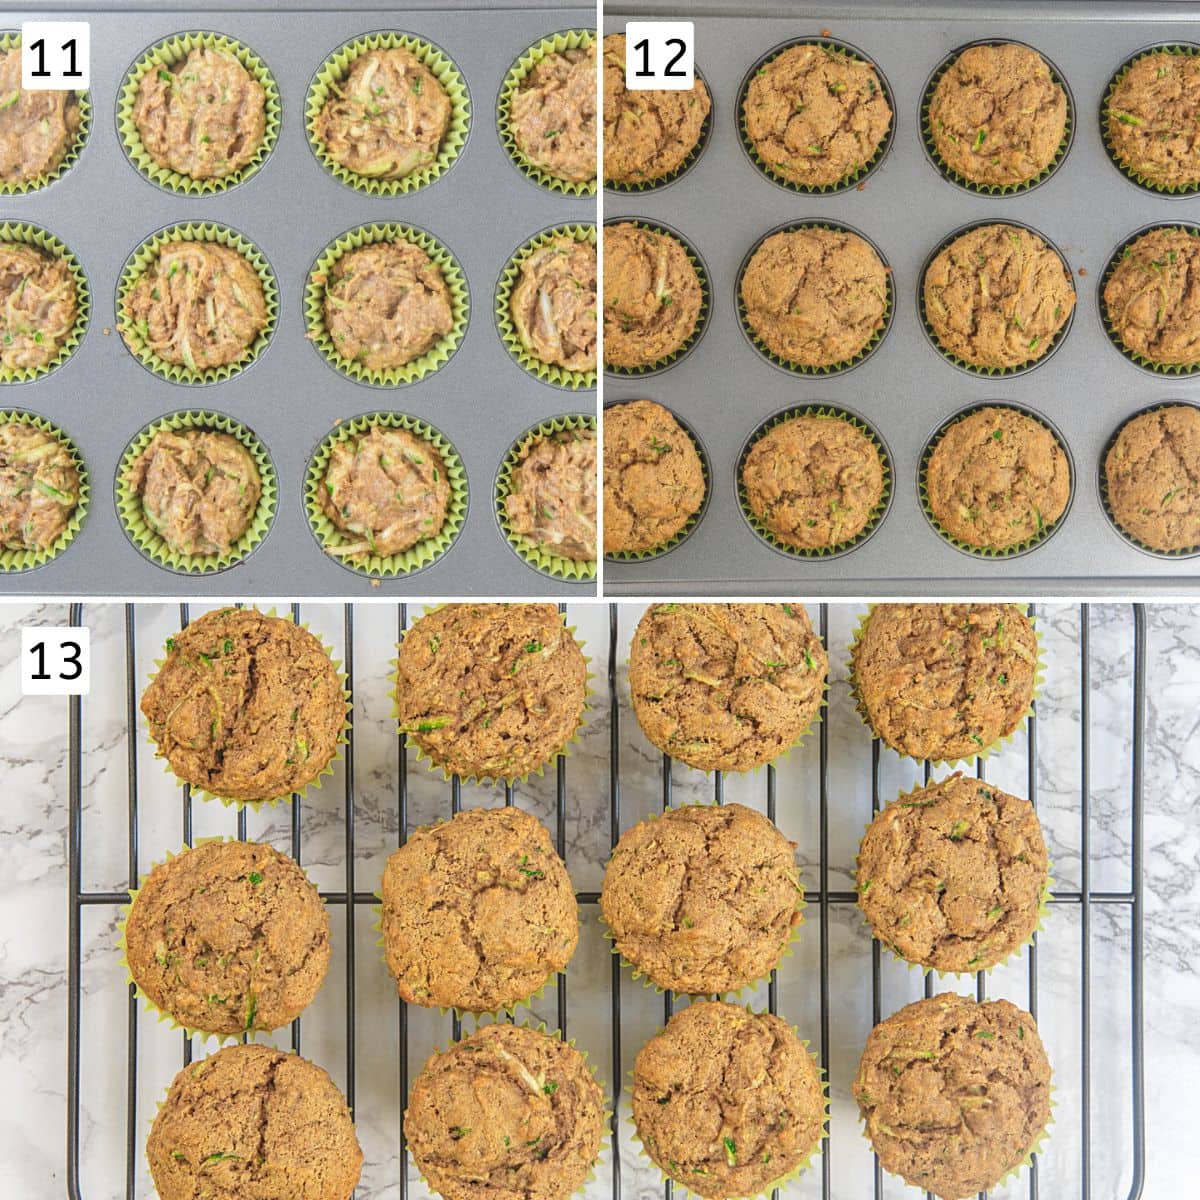 Collage of 3 images showing muffin batter into the pan, baked muffins and cooling on the rack.